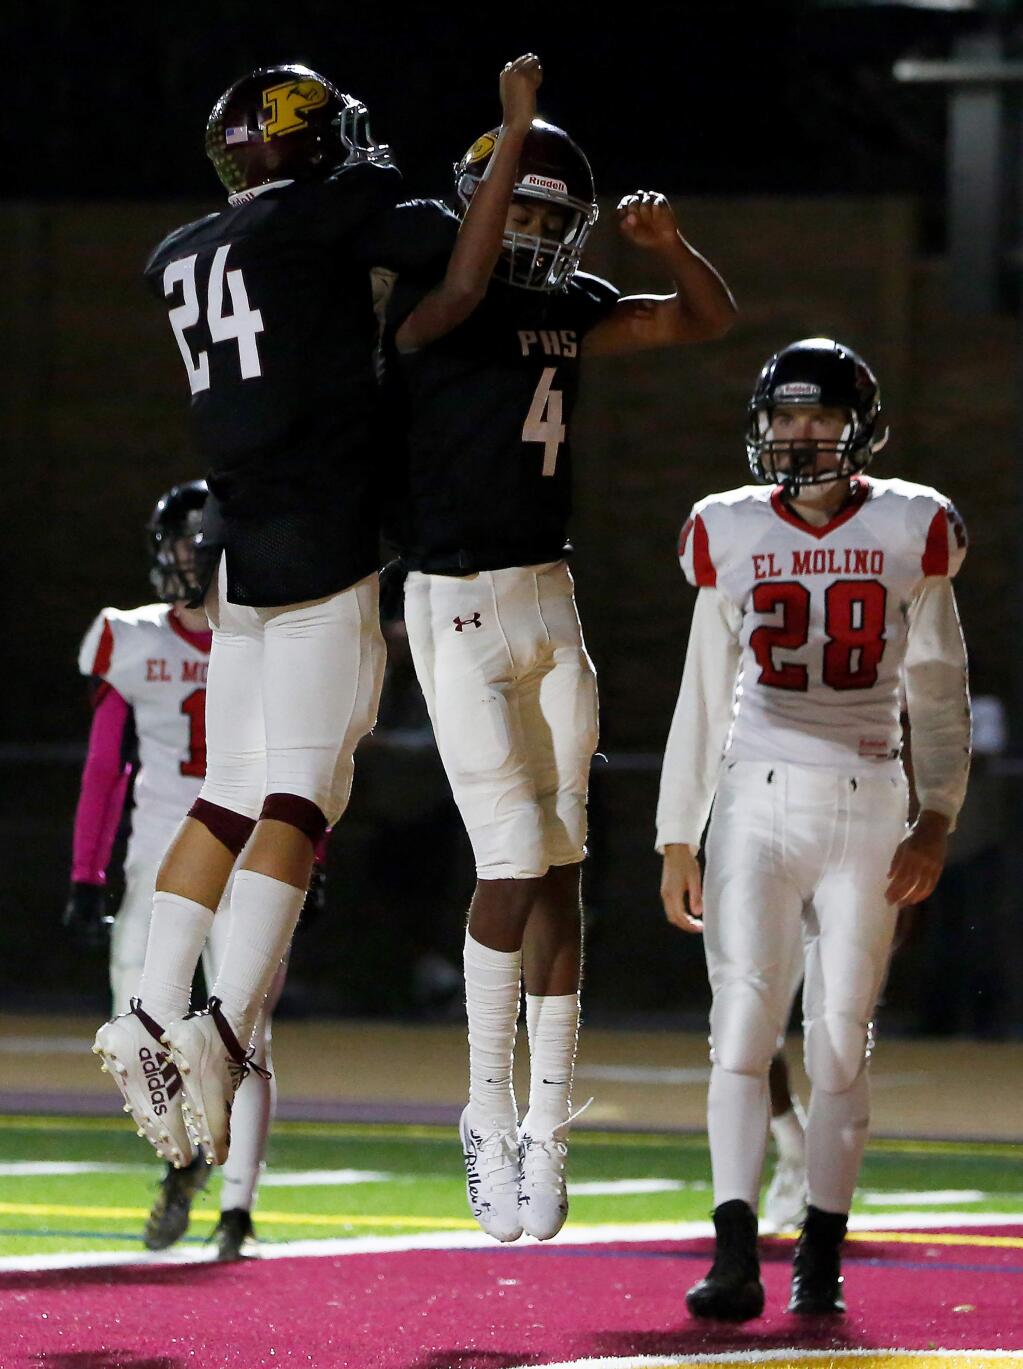 Piner's Adrian Torres, left, jumps together with Yonaton Isack to celebrate after Isack scored a touchdown, while El Molino's Soul Berna, far right, looks on, during the first half on Friday, Oct. 11, 2019. (Alvin Jornada / The Press Democrat)